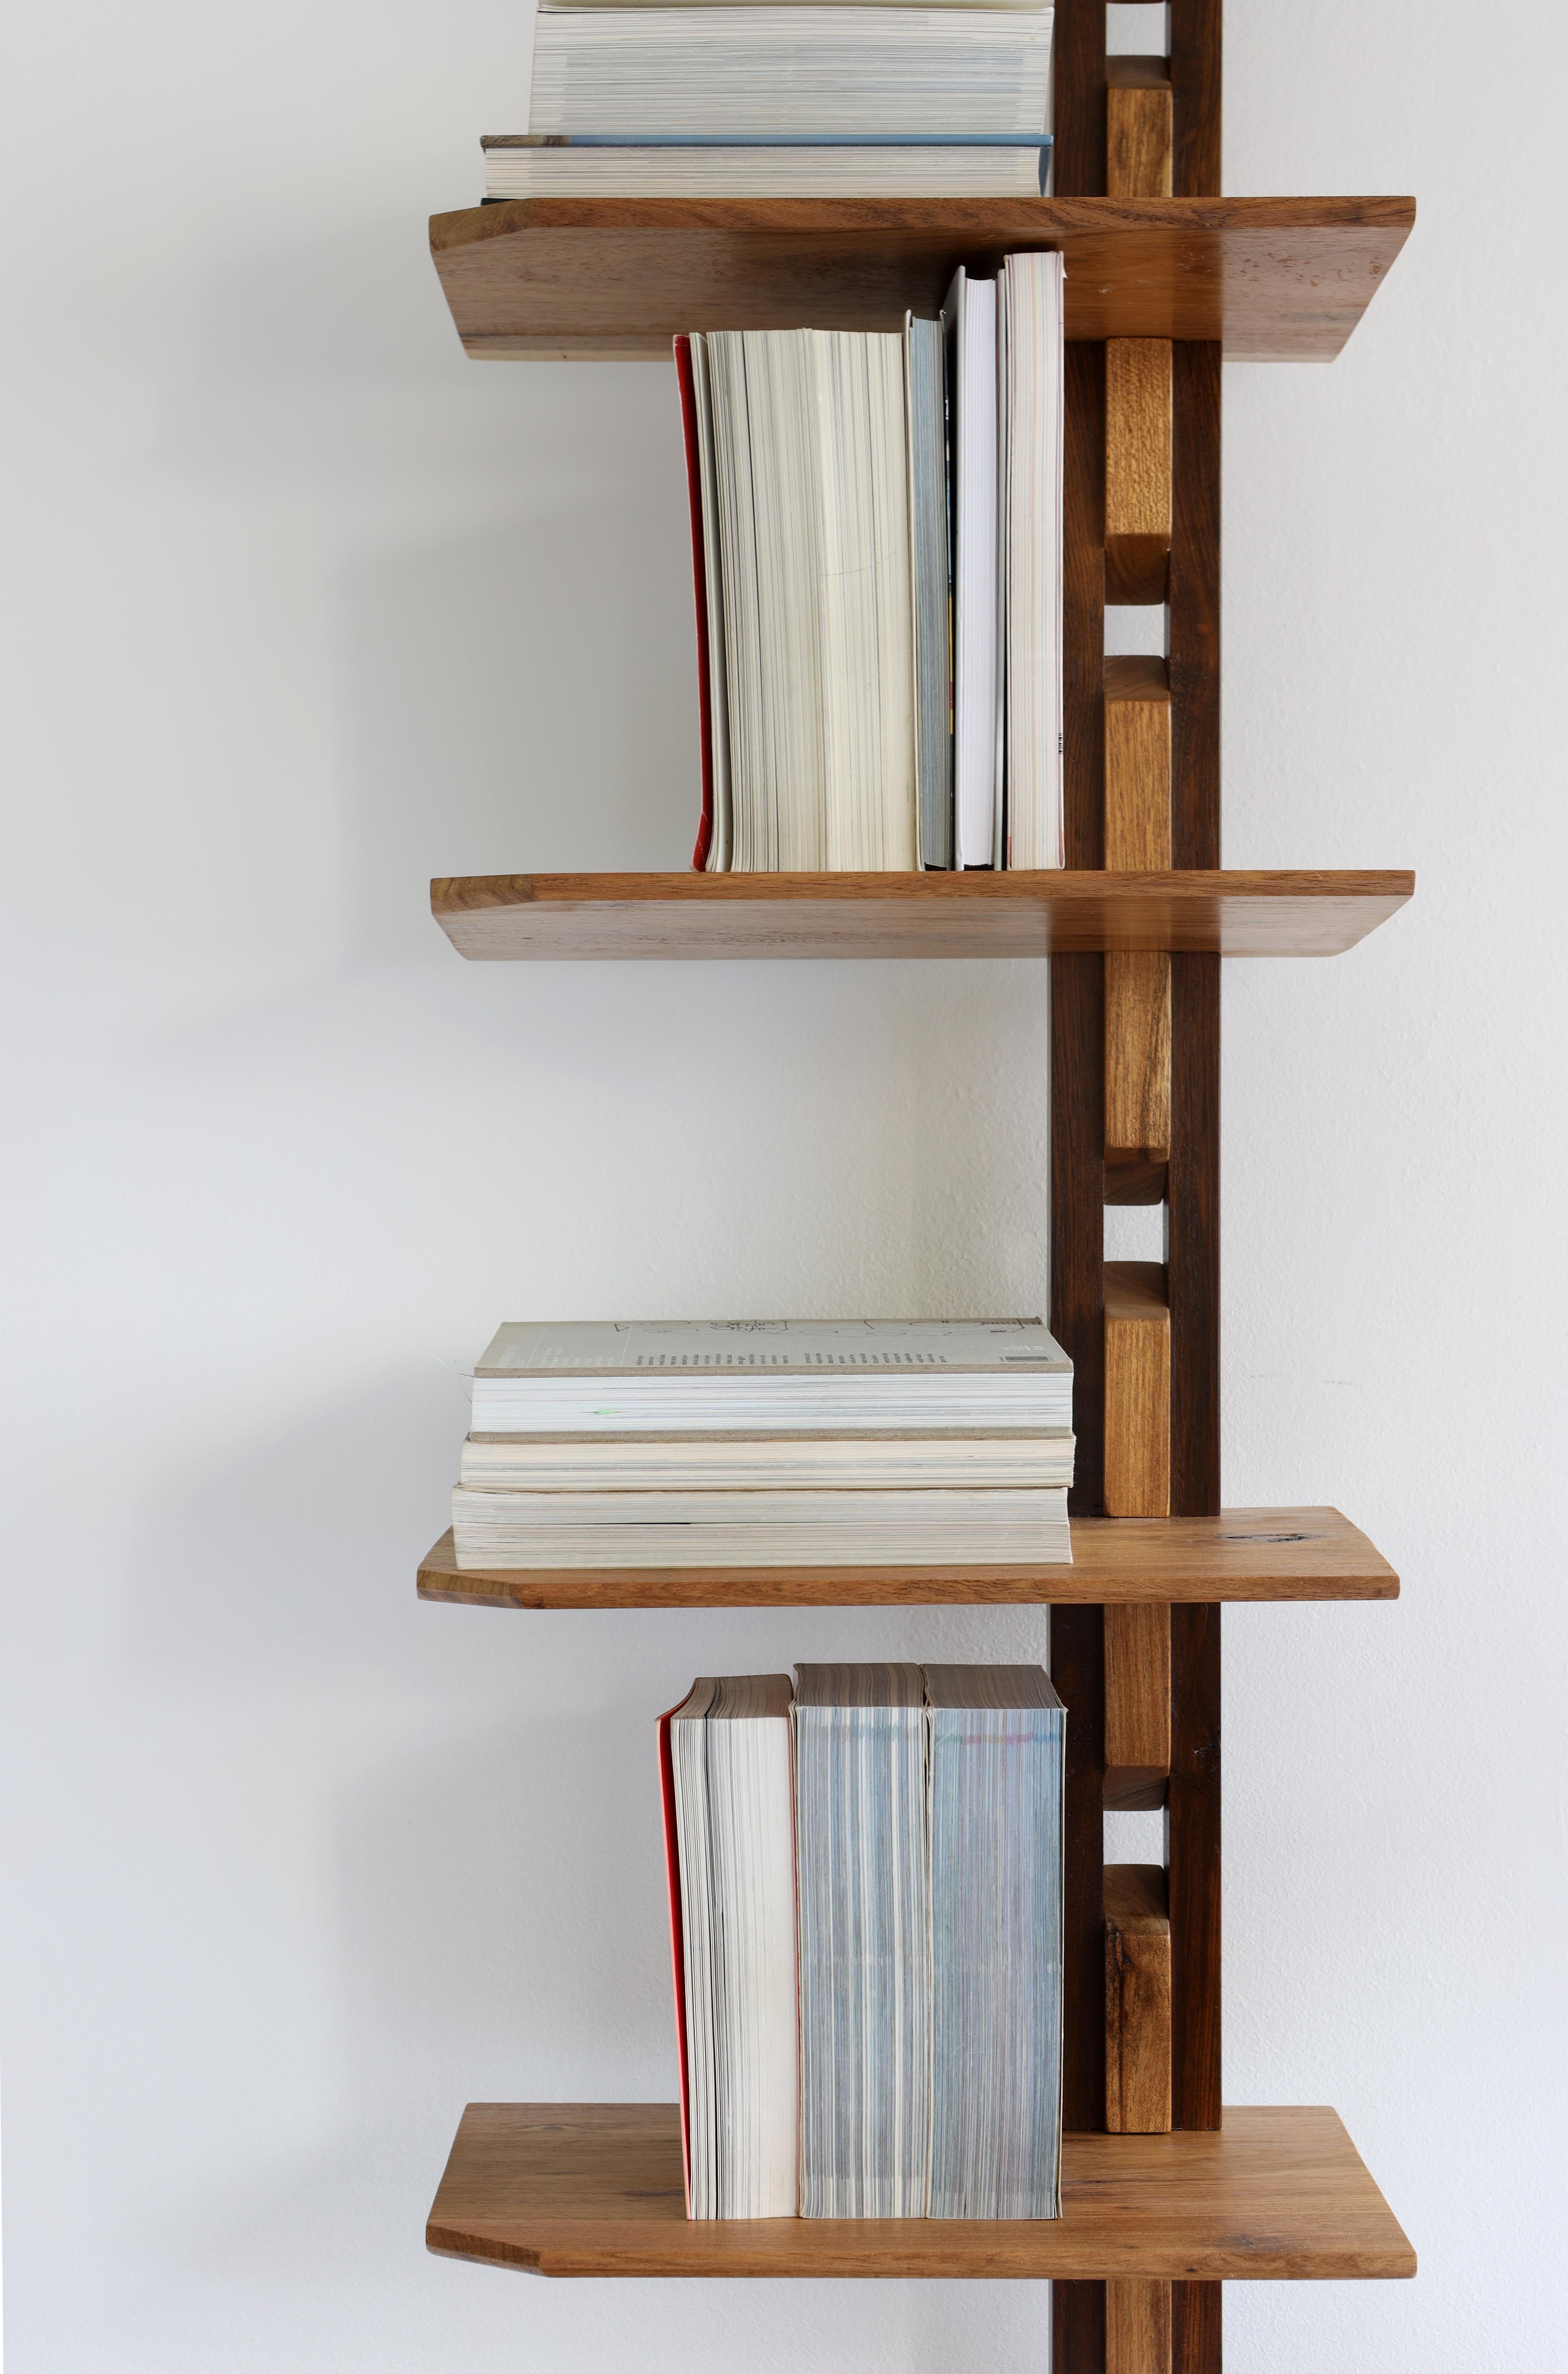 The book shelf column is a piece of unique construction and design. Its geometric shapes, straight angles and simple lines, significant
characteristics of the modernist movement in Brazil, were a source
of inspiration for their creation.

As it